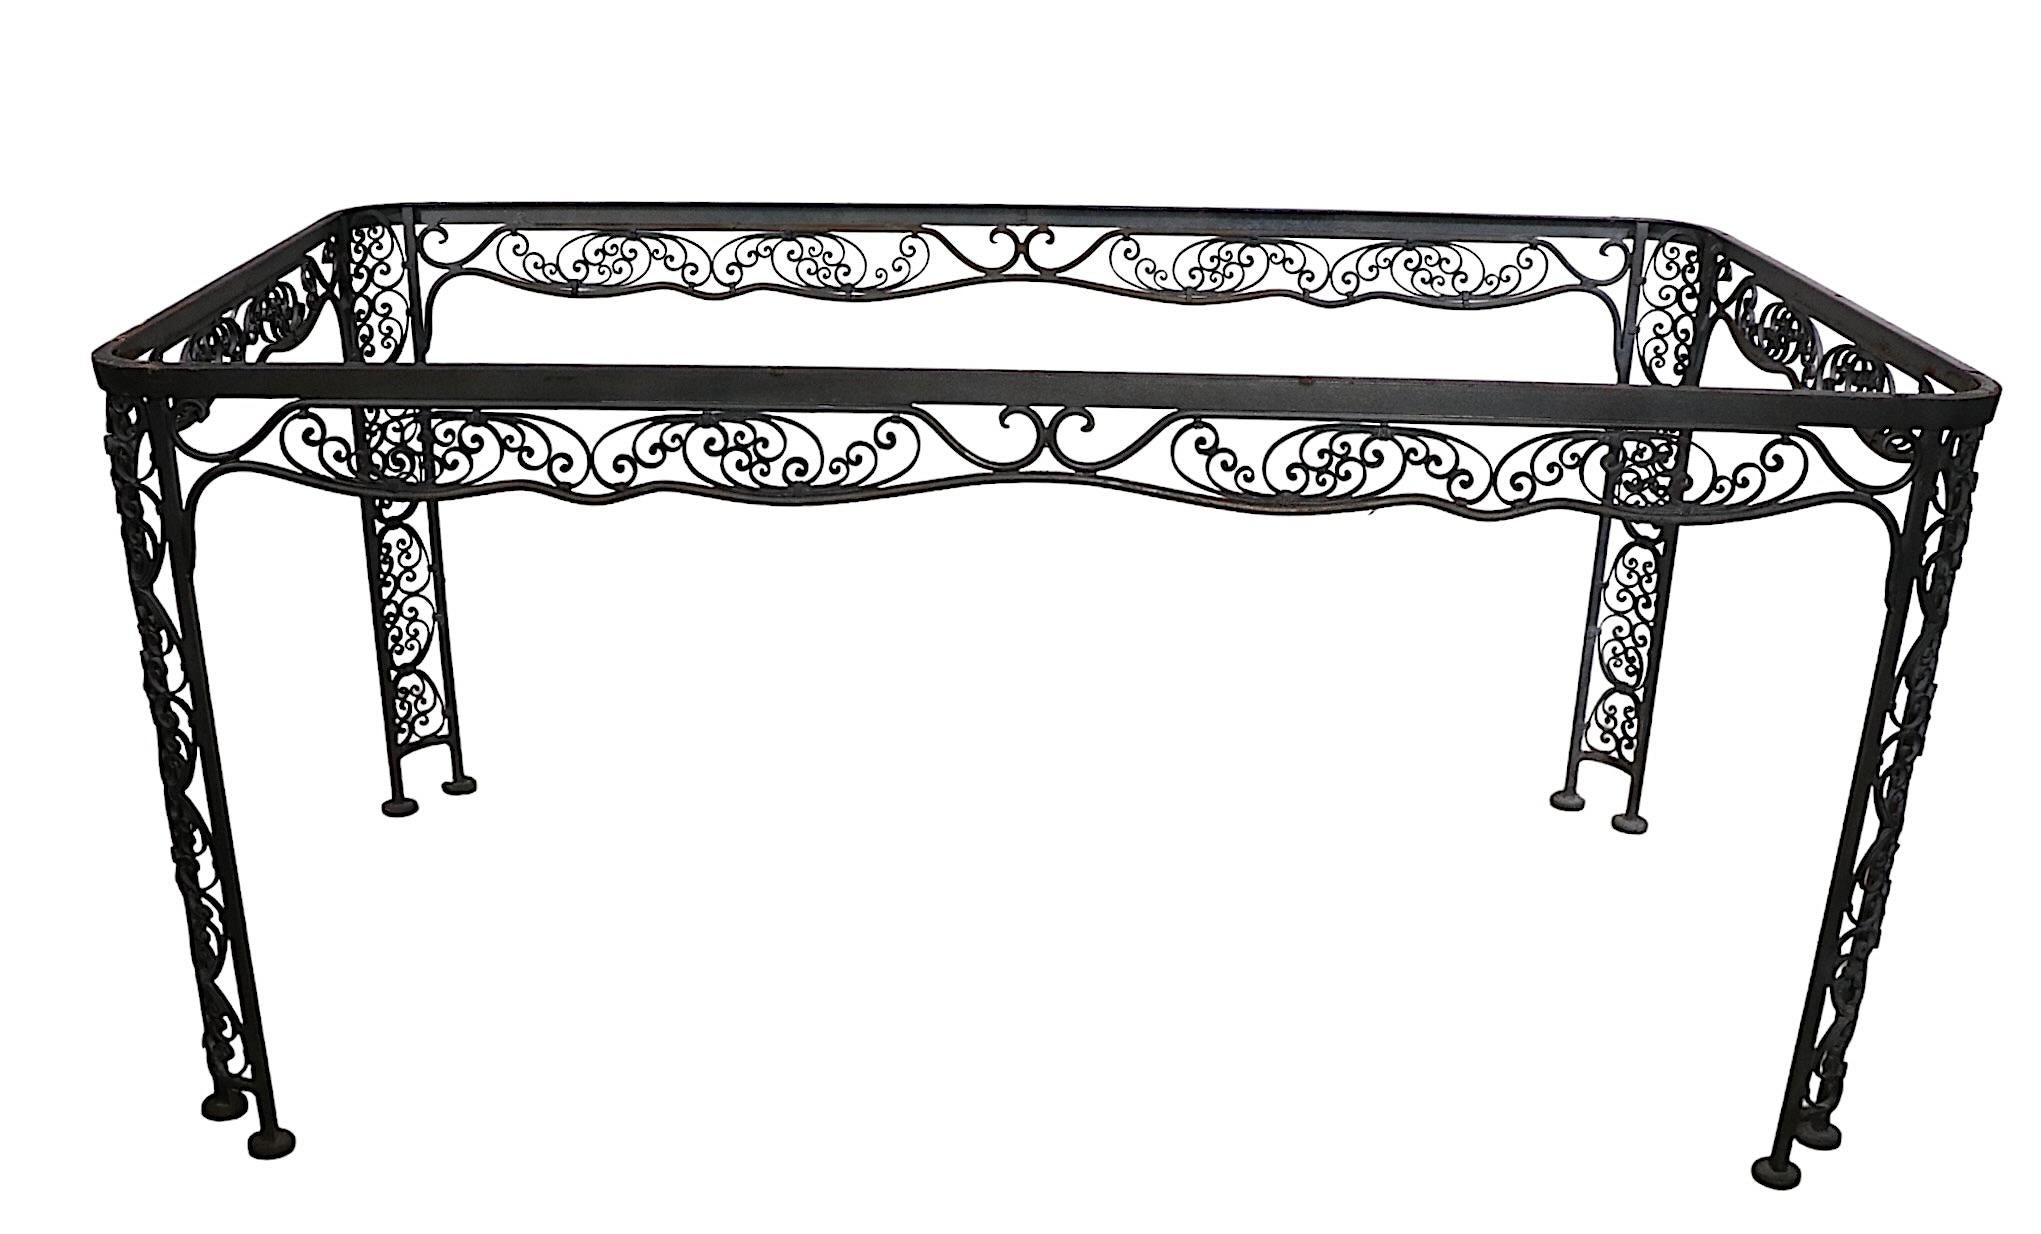 Ornate Wrought Iron Garden Patio Poolside Dining Table by Lee Woodard, c 1940's For Sale 8